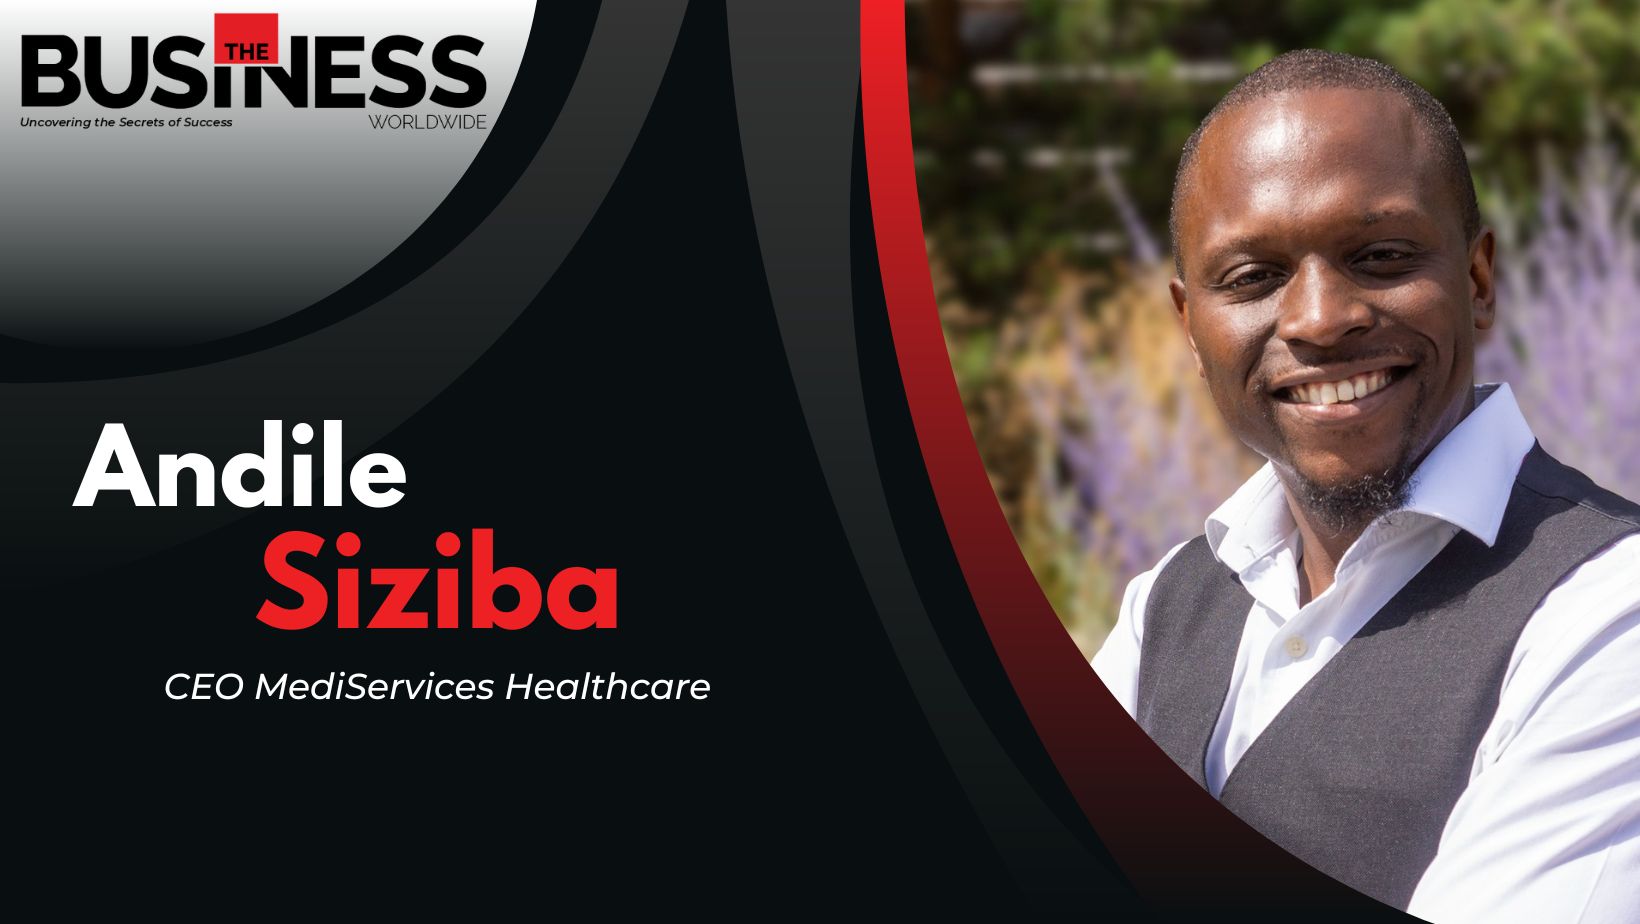 Andile Siziba: Delivering Excellence in Healthcare Through Diagnostic and Clinical Services